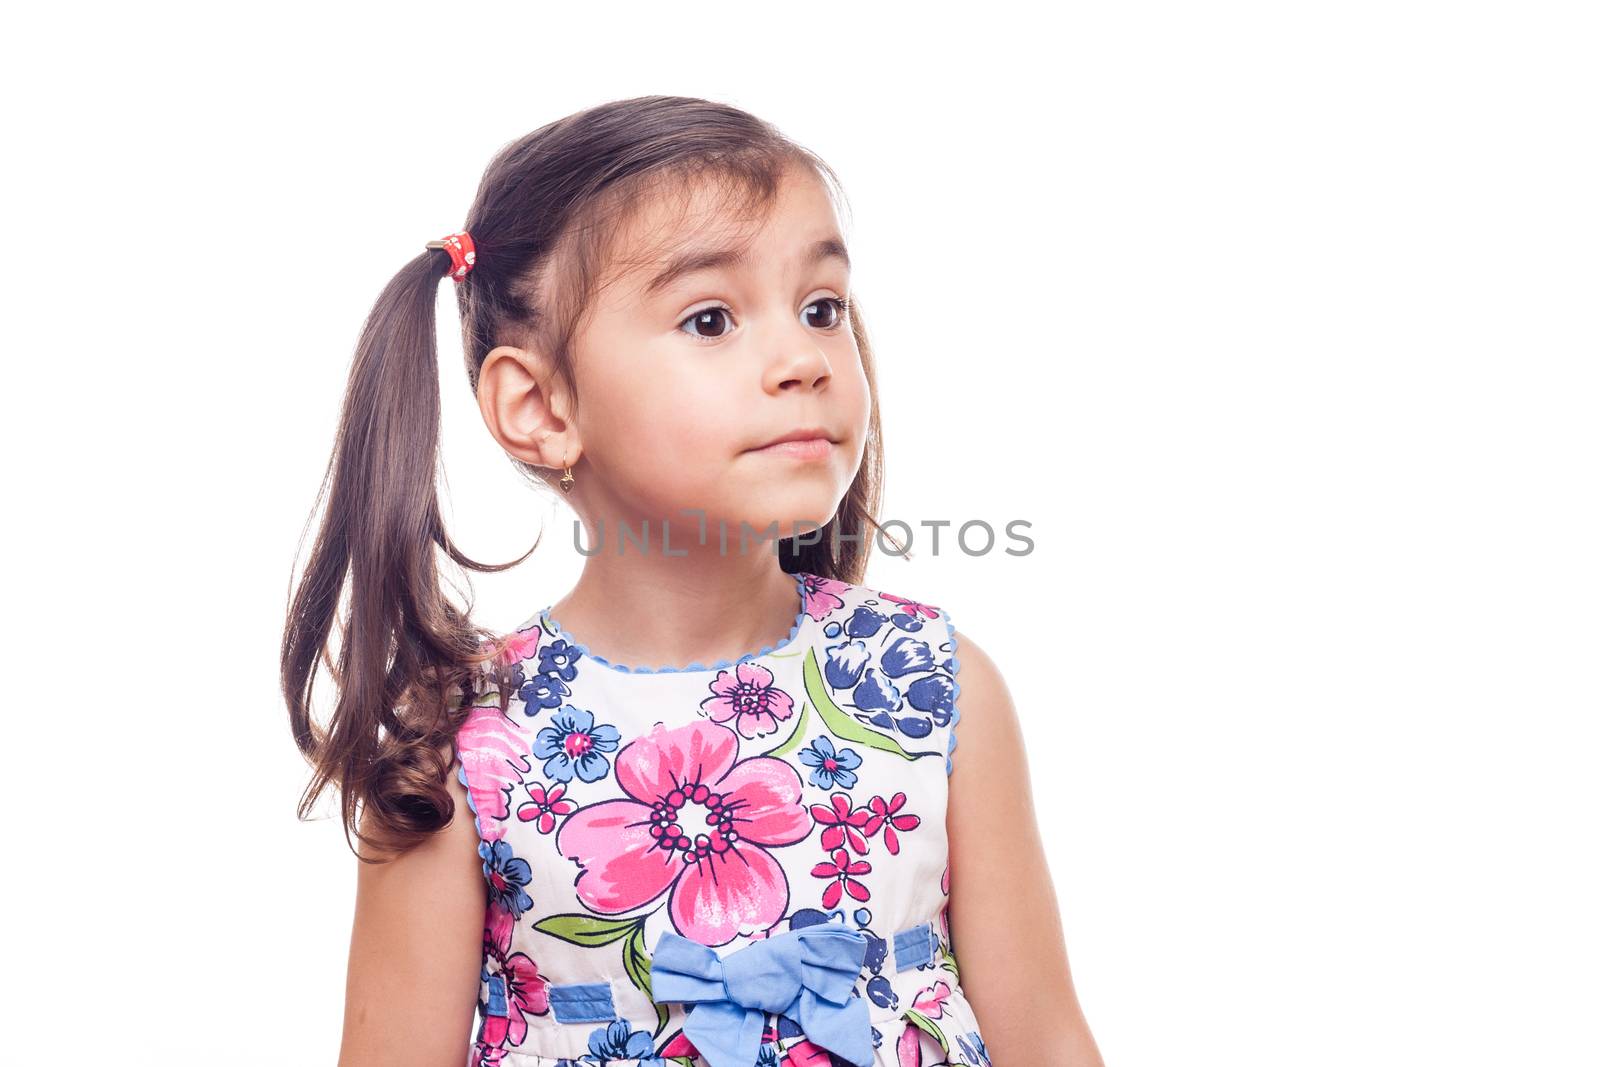 young girl on white background posing for the camera